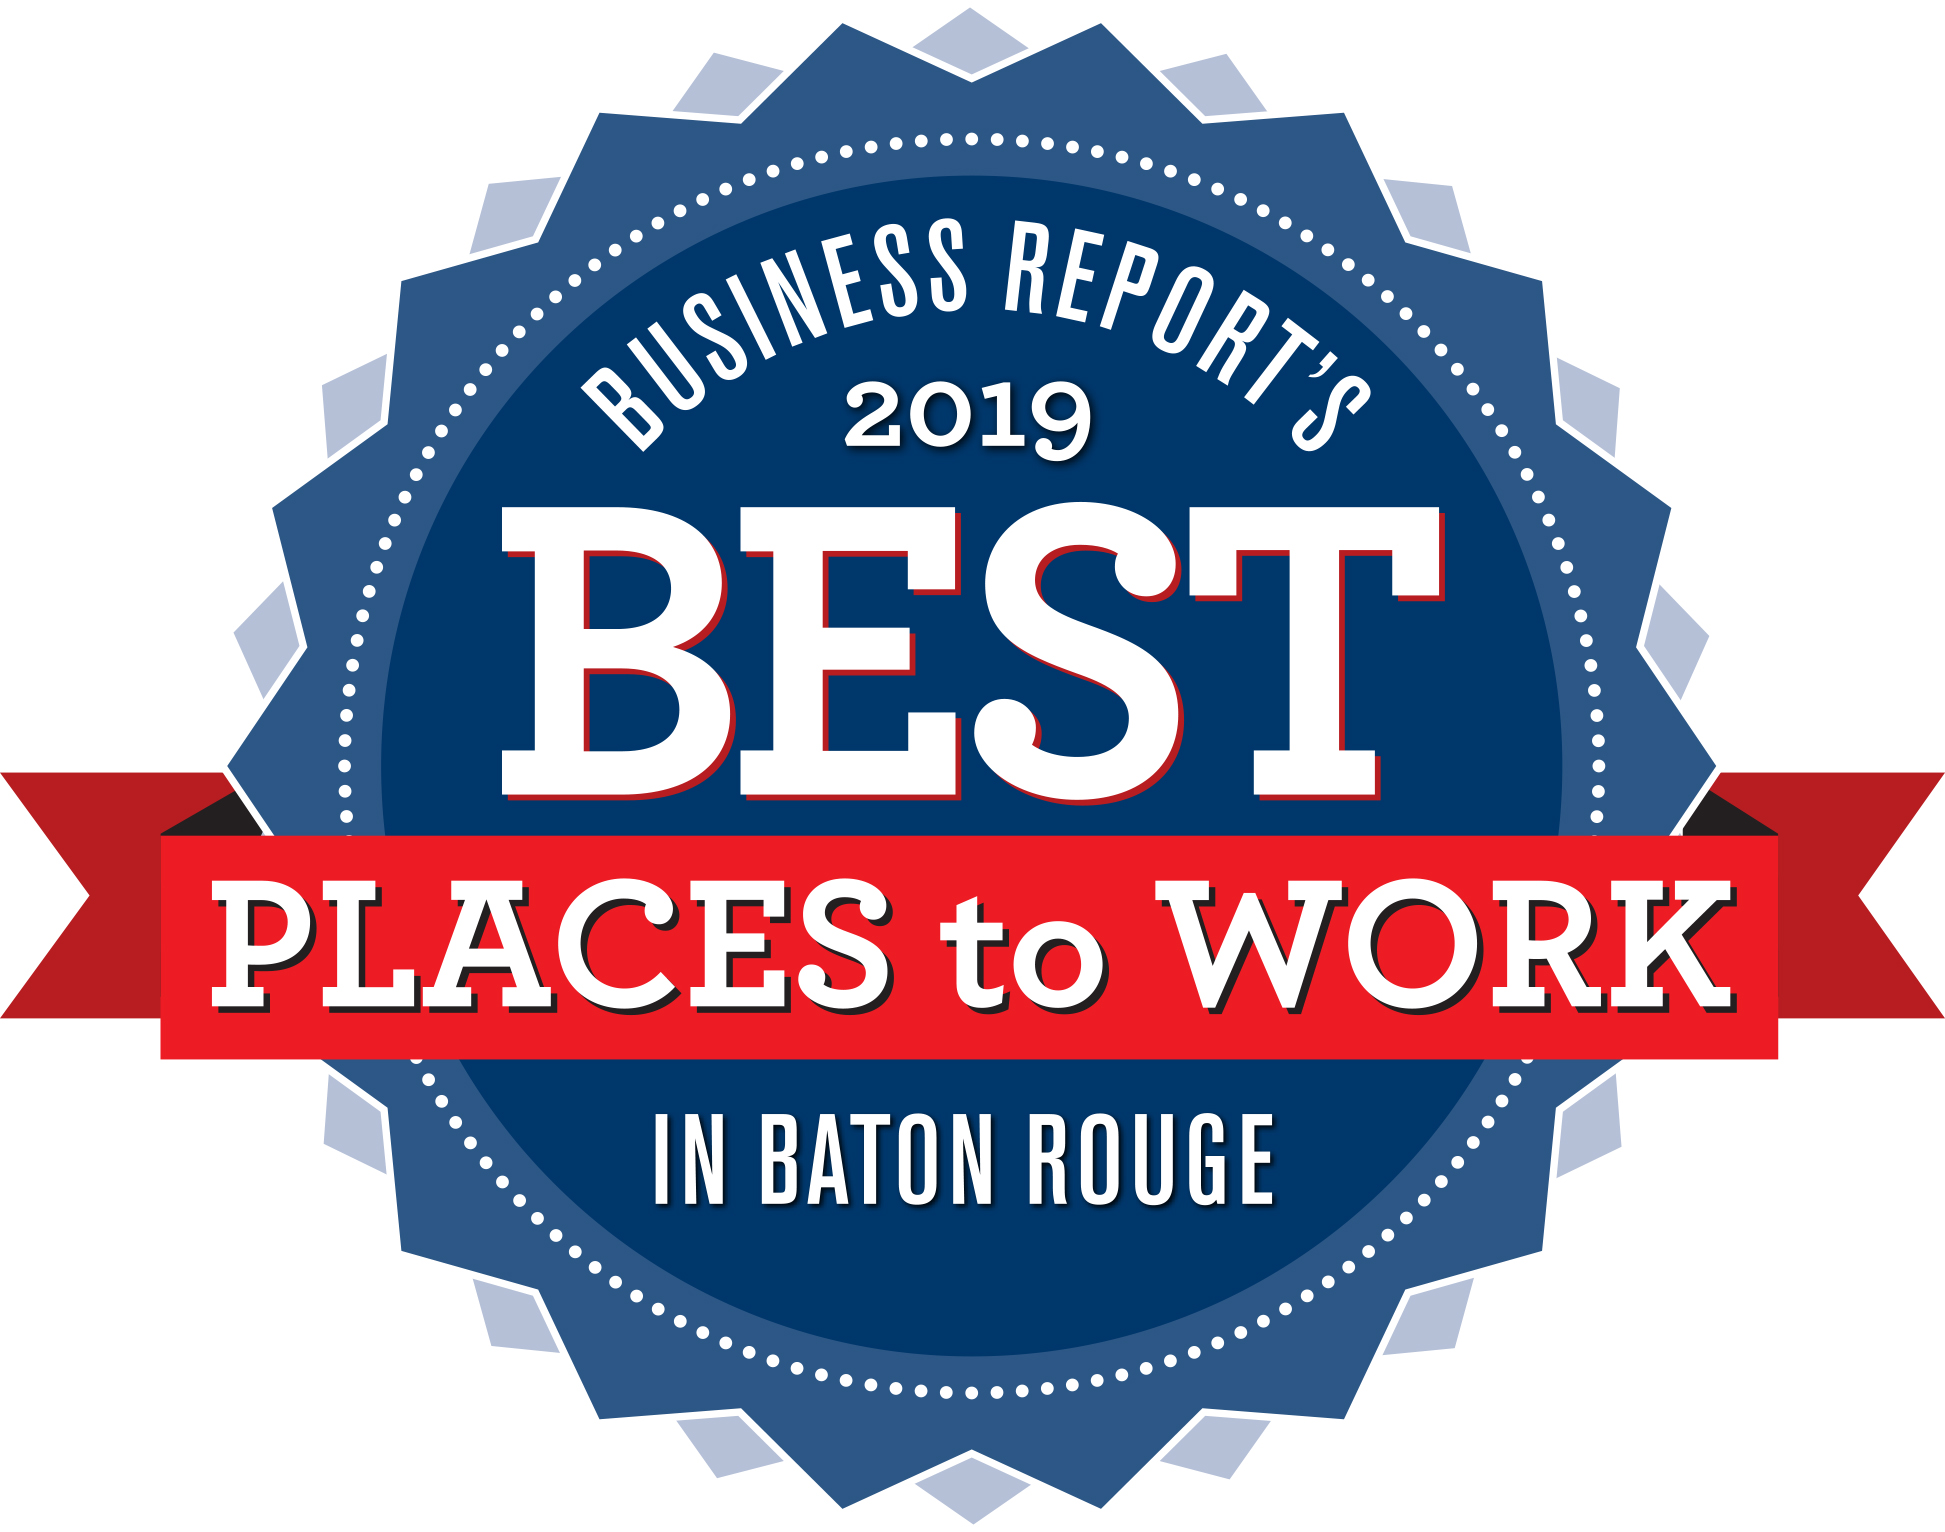 Register now for the 2019 Best Places to Work - Baton Rouge Business Report